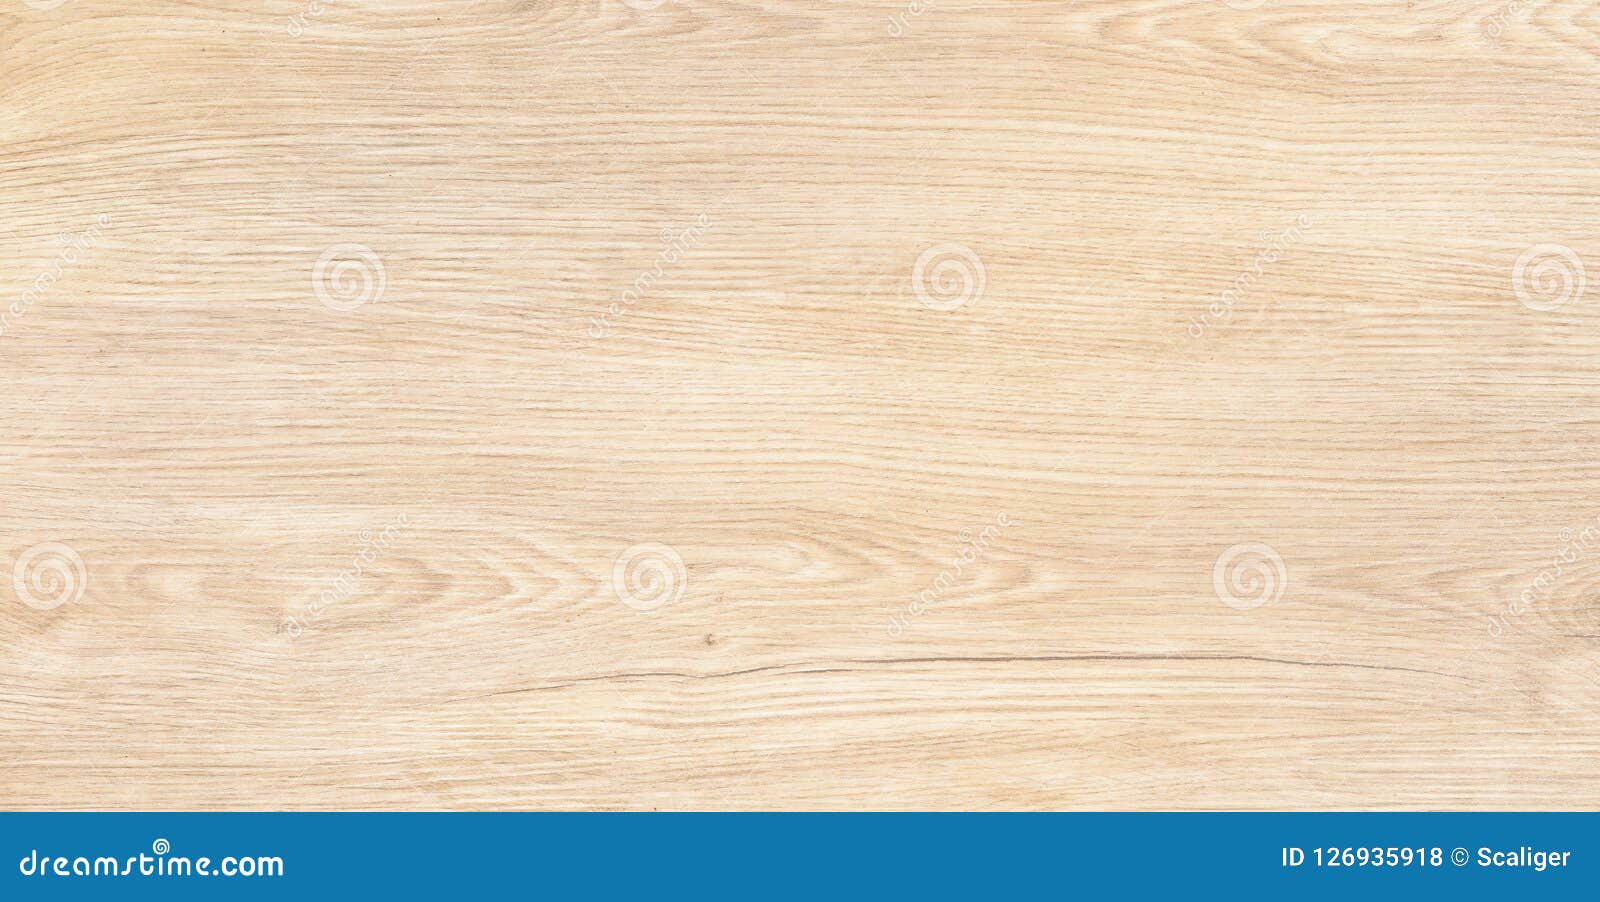 Top View Of A Wood Or Plywood For Backdrop Stock Photo Image Of Backdrop Home 126935918